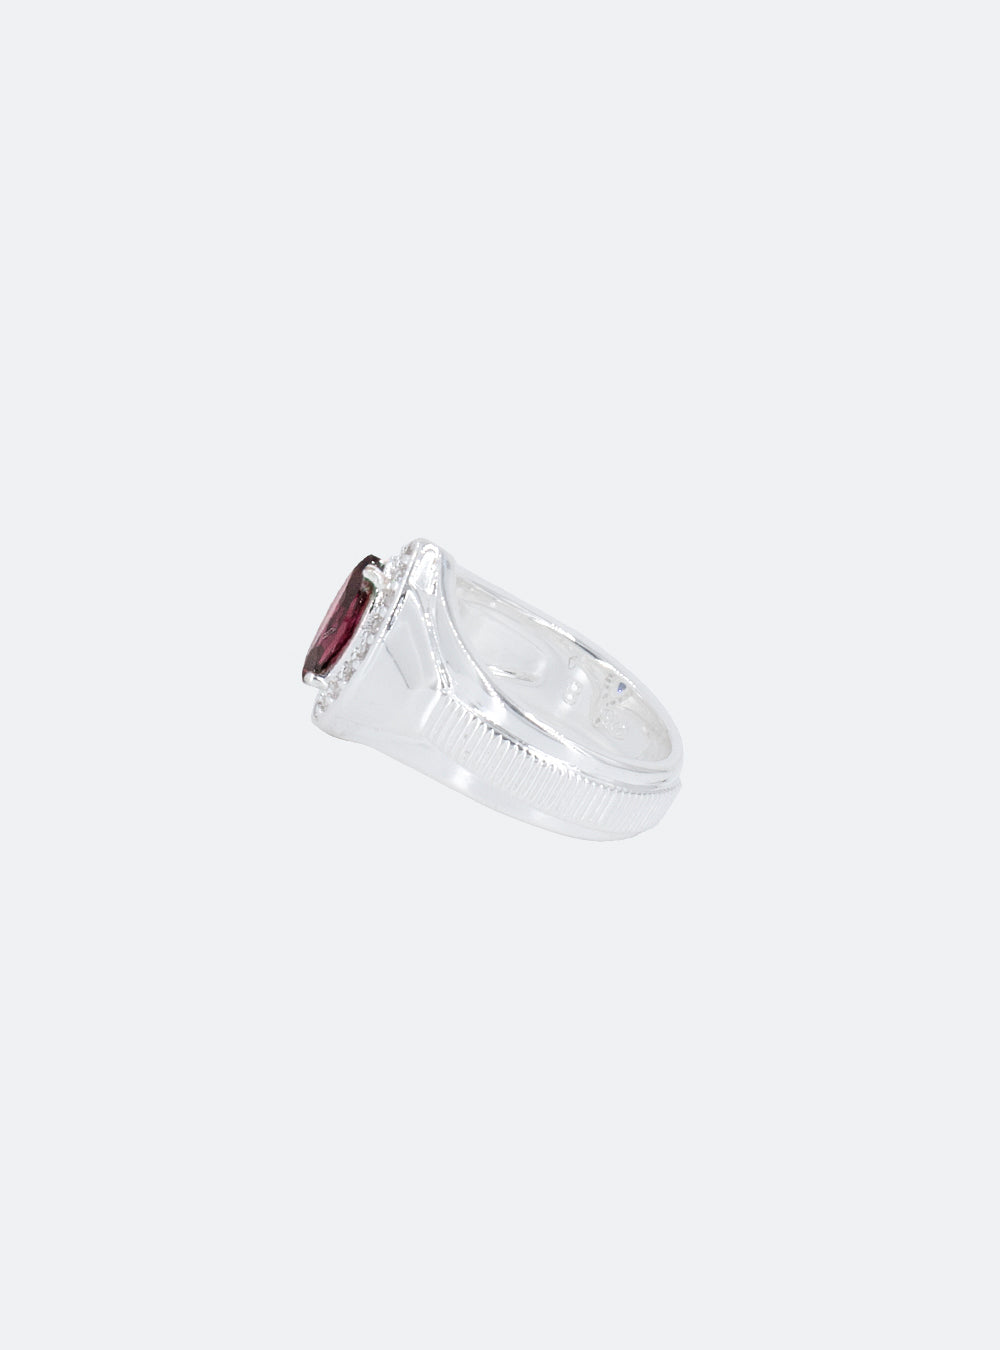 Mechs cocktail ring - Rouge